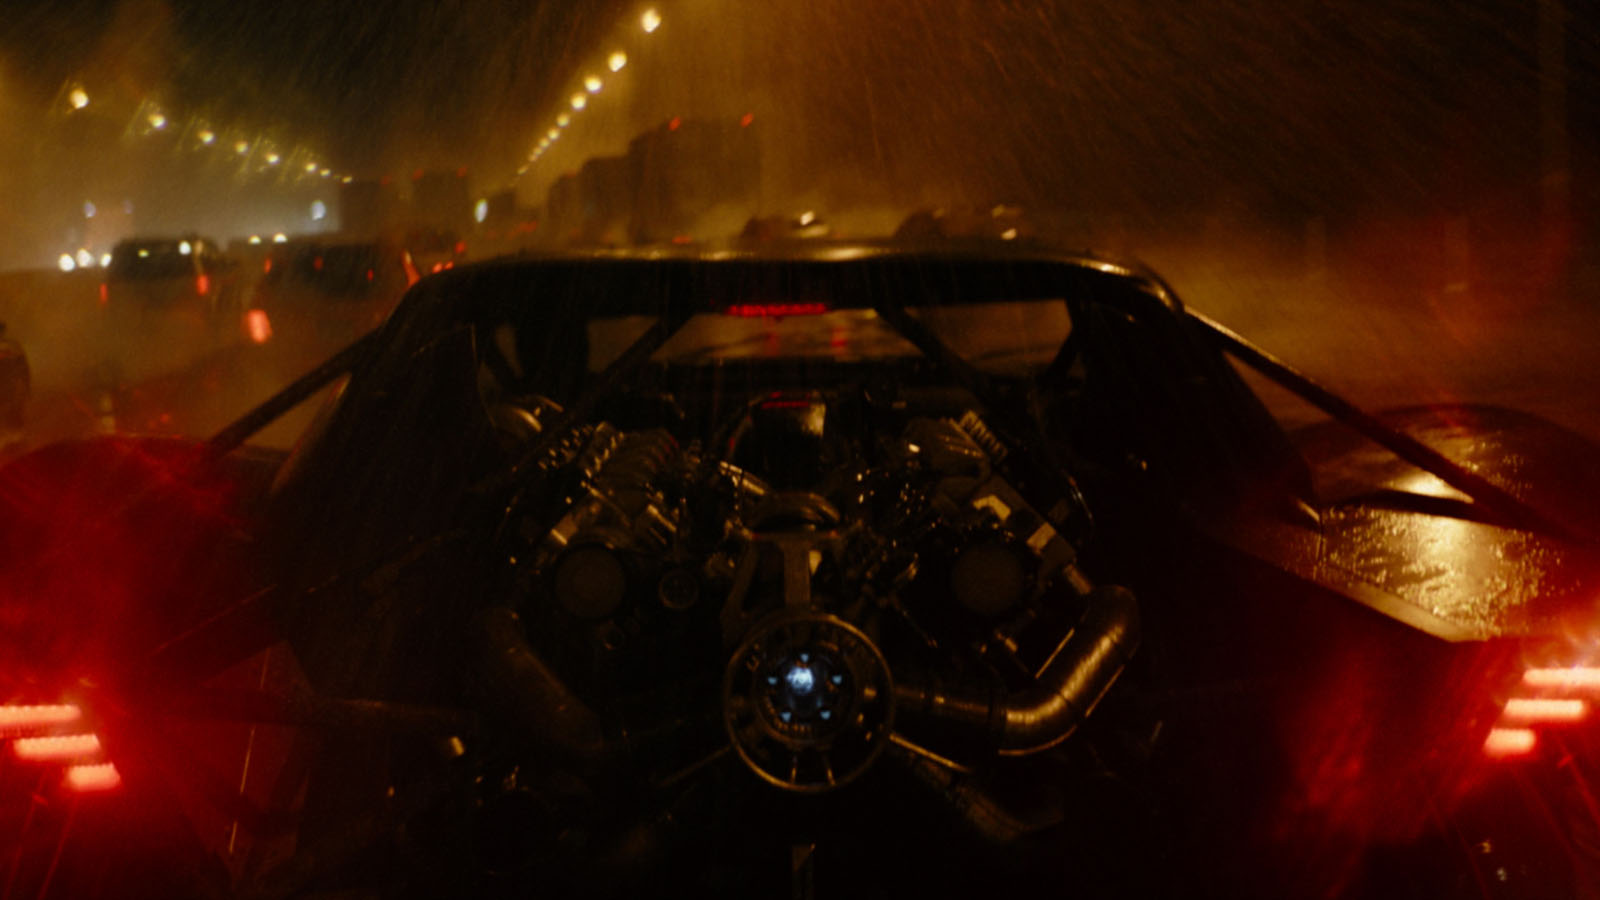 Much of the Batmobile’s chase scene was practical photography. Image © Warner Bros.